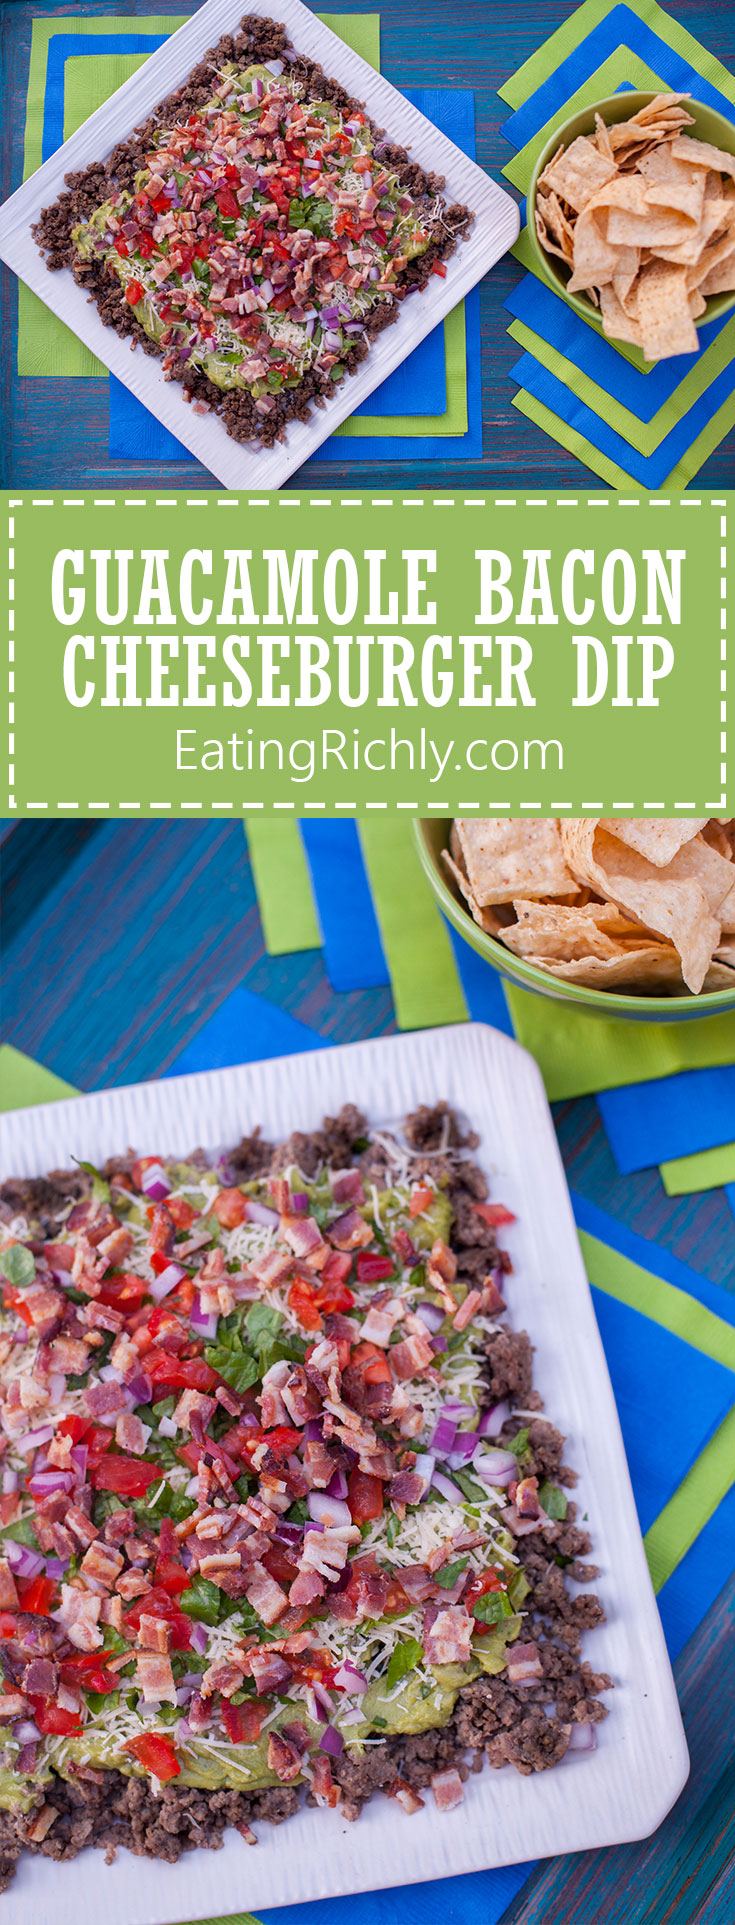 This guacamole bacon burger dip has all the flavors of your favorite burger, turned into a seven layer dip. It's the perfect football snack recipe! Easy to make the day before as well. From EatingRichly.com